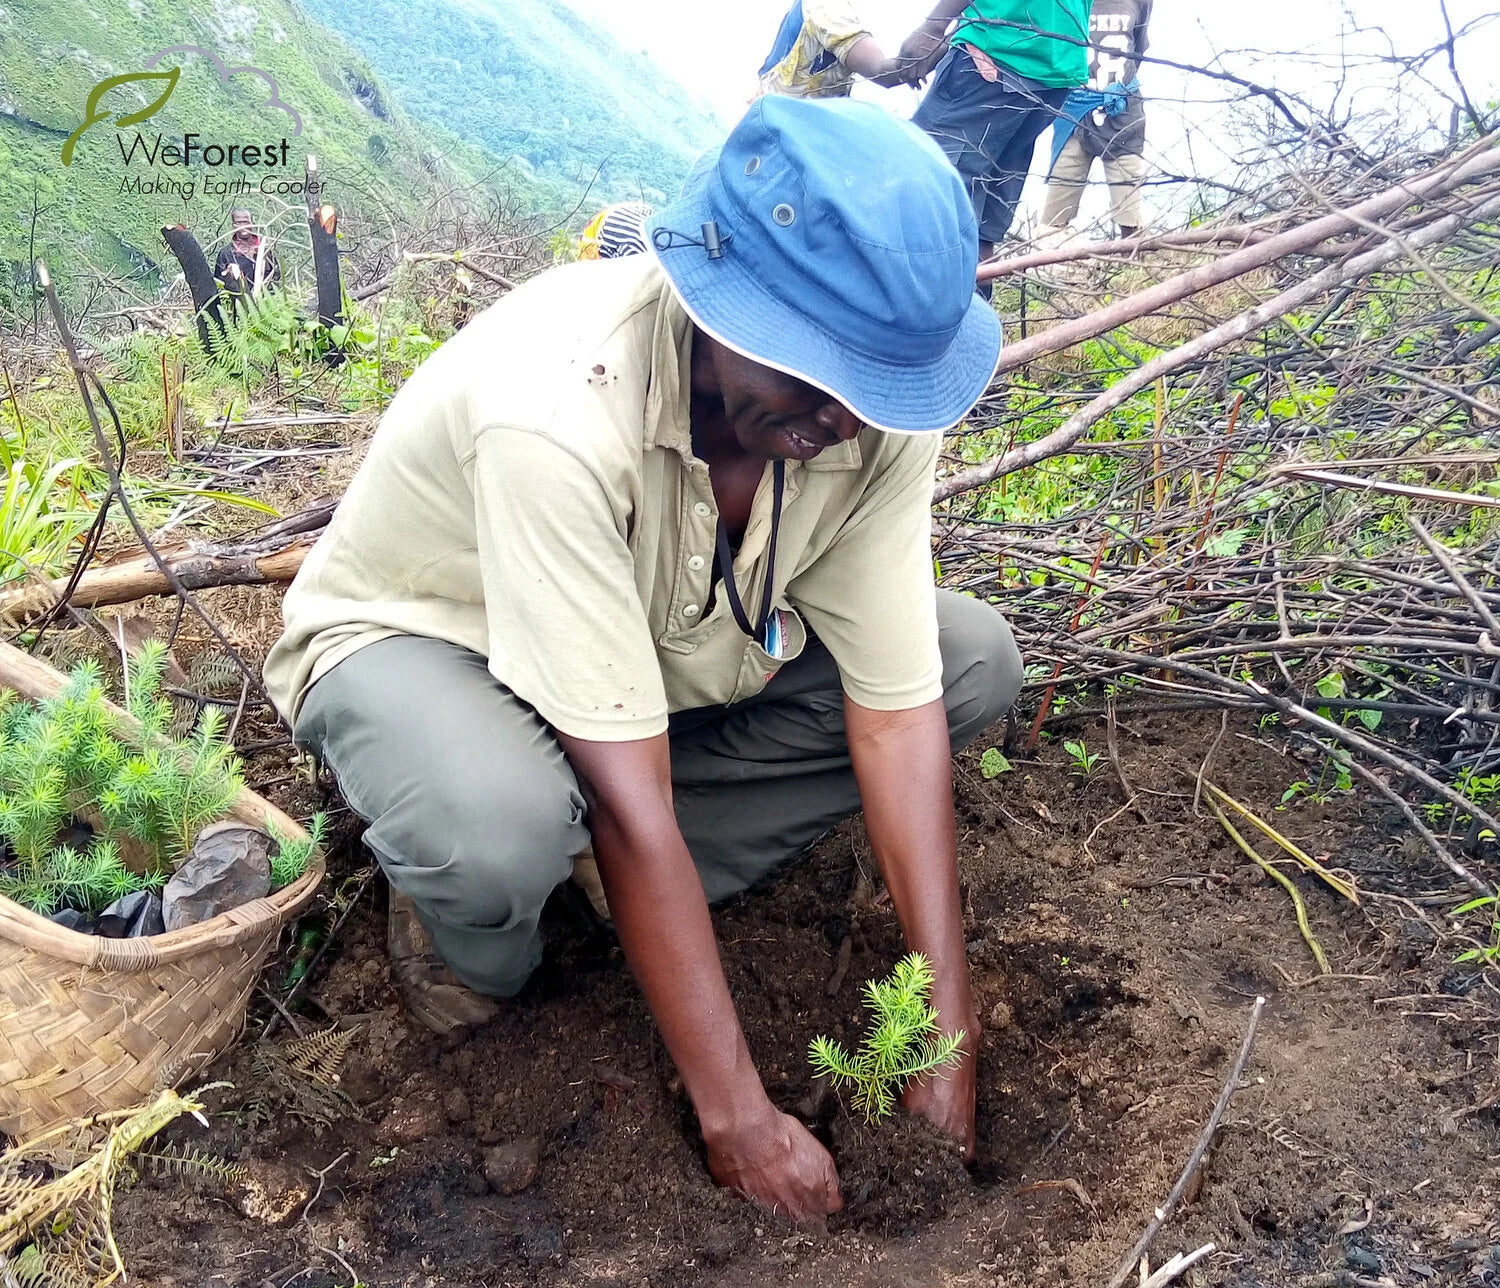 Reforestation of forest made by a person planting a tree